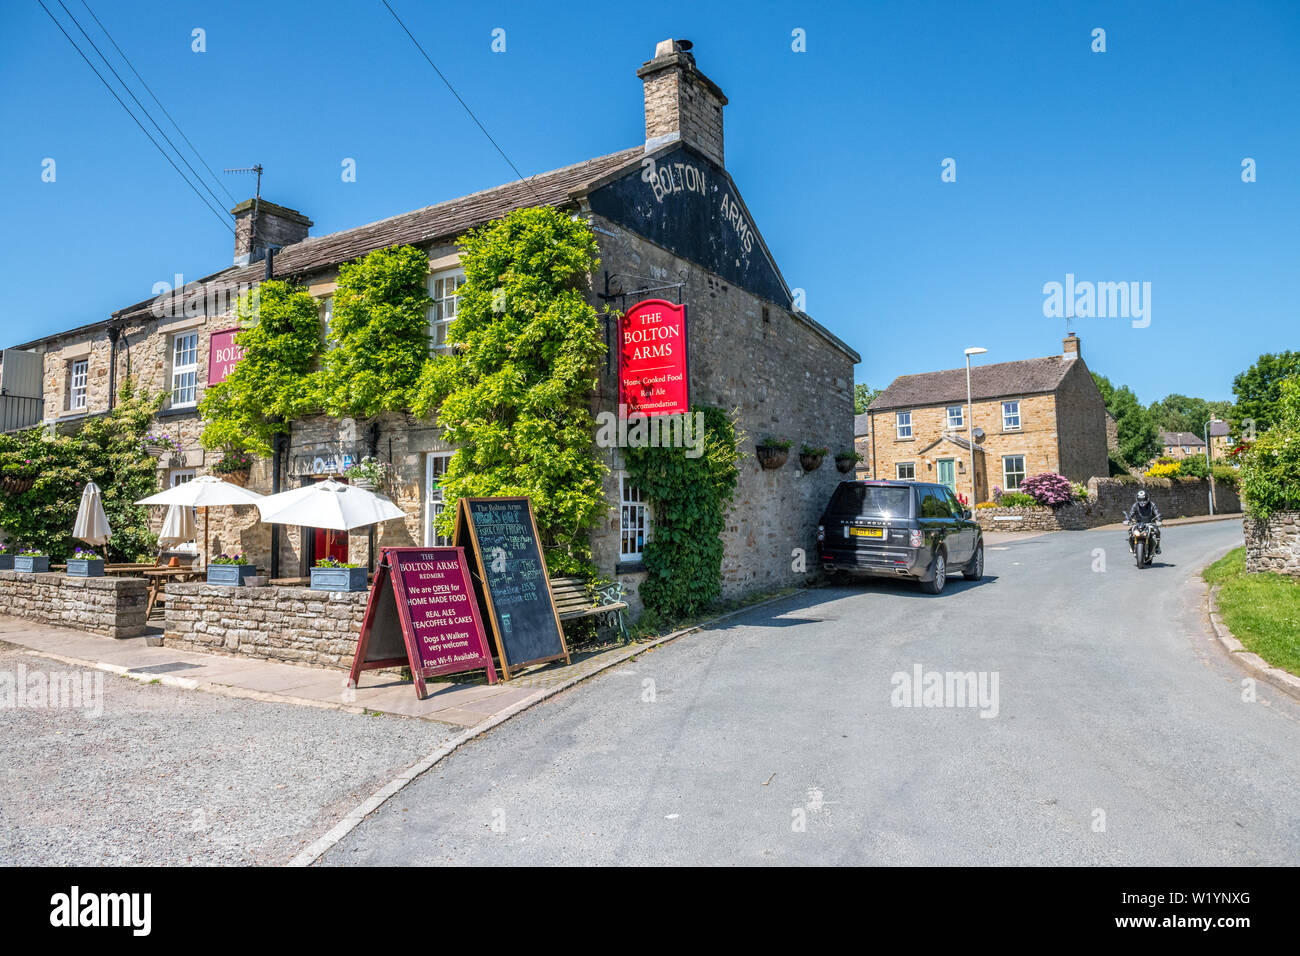 The Bolton Arms, a village pub in the Yorkshire Dales village of Redmire, Yorkshire, England, UK. Stock Photo